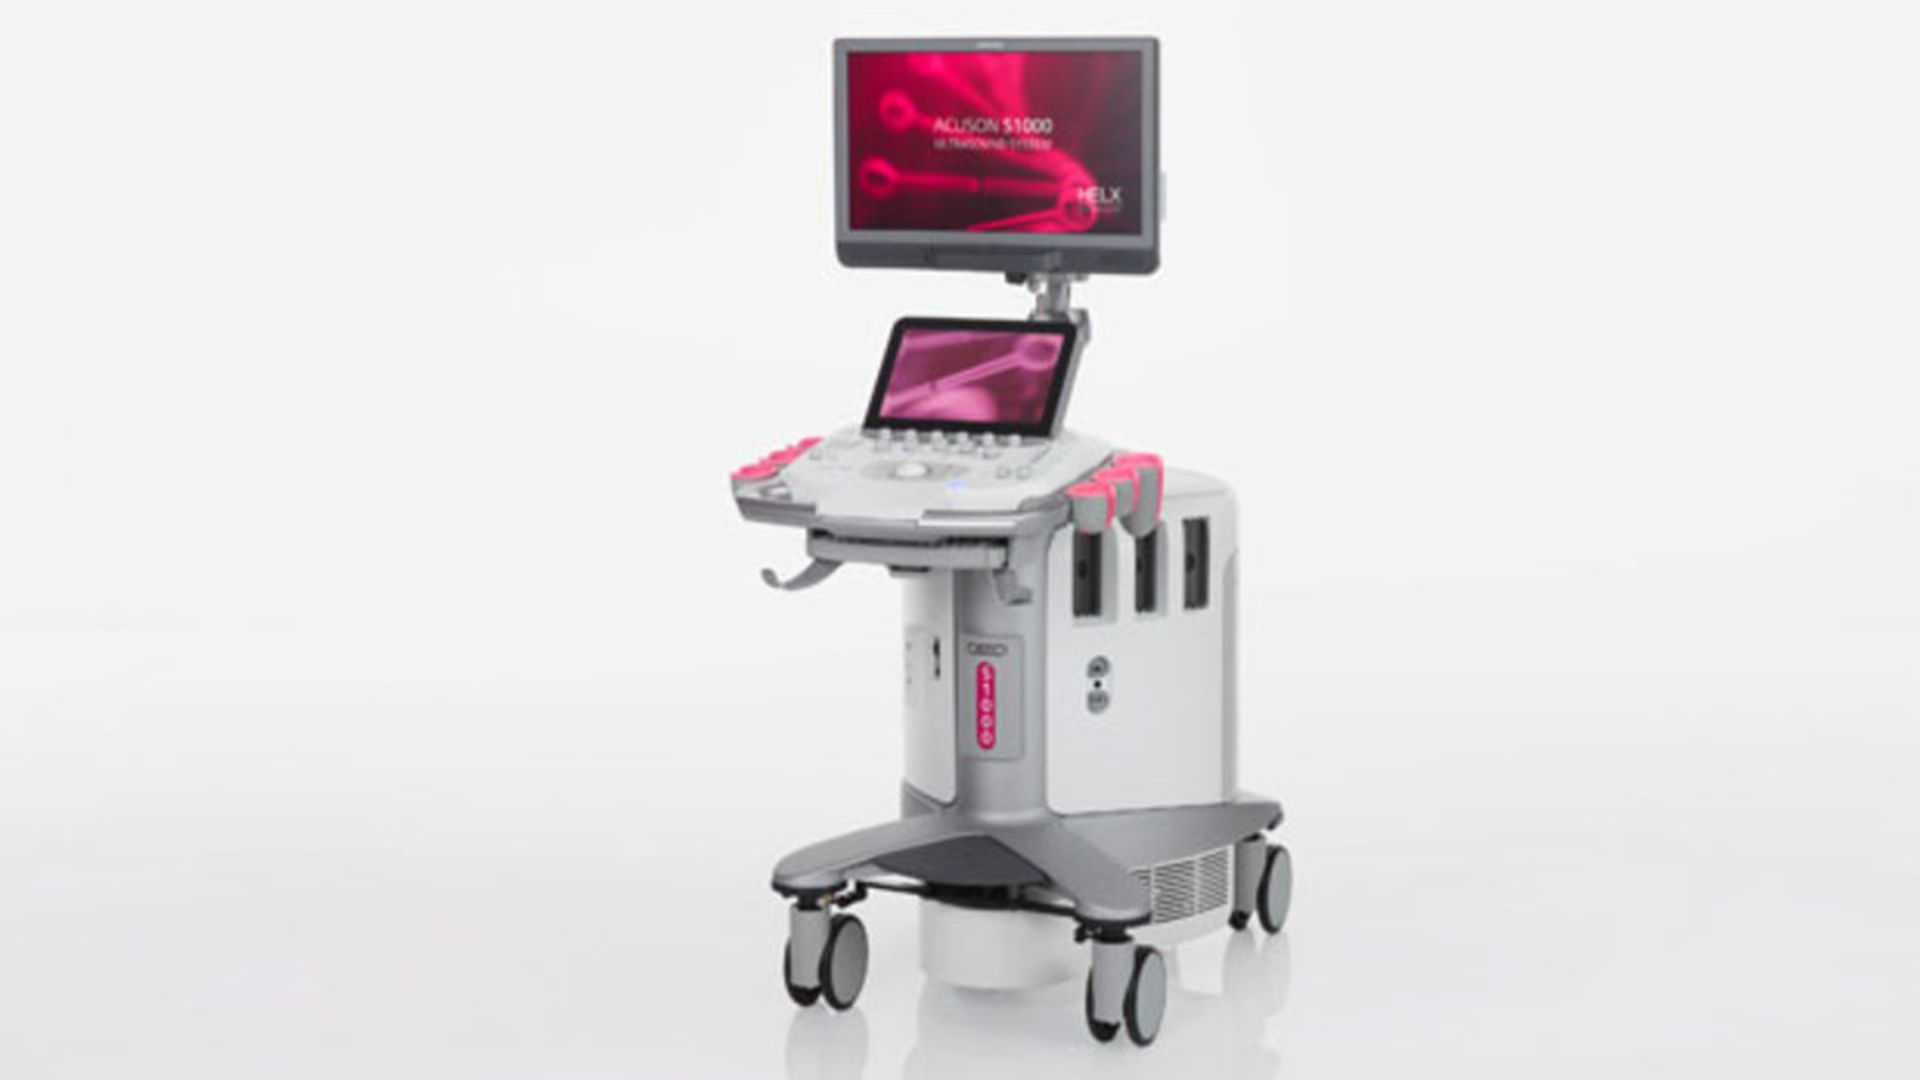 acuson_s1000_ultrasound_system_helx_evolution_with_touch_control4-02422910_10-06551686_8